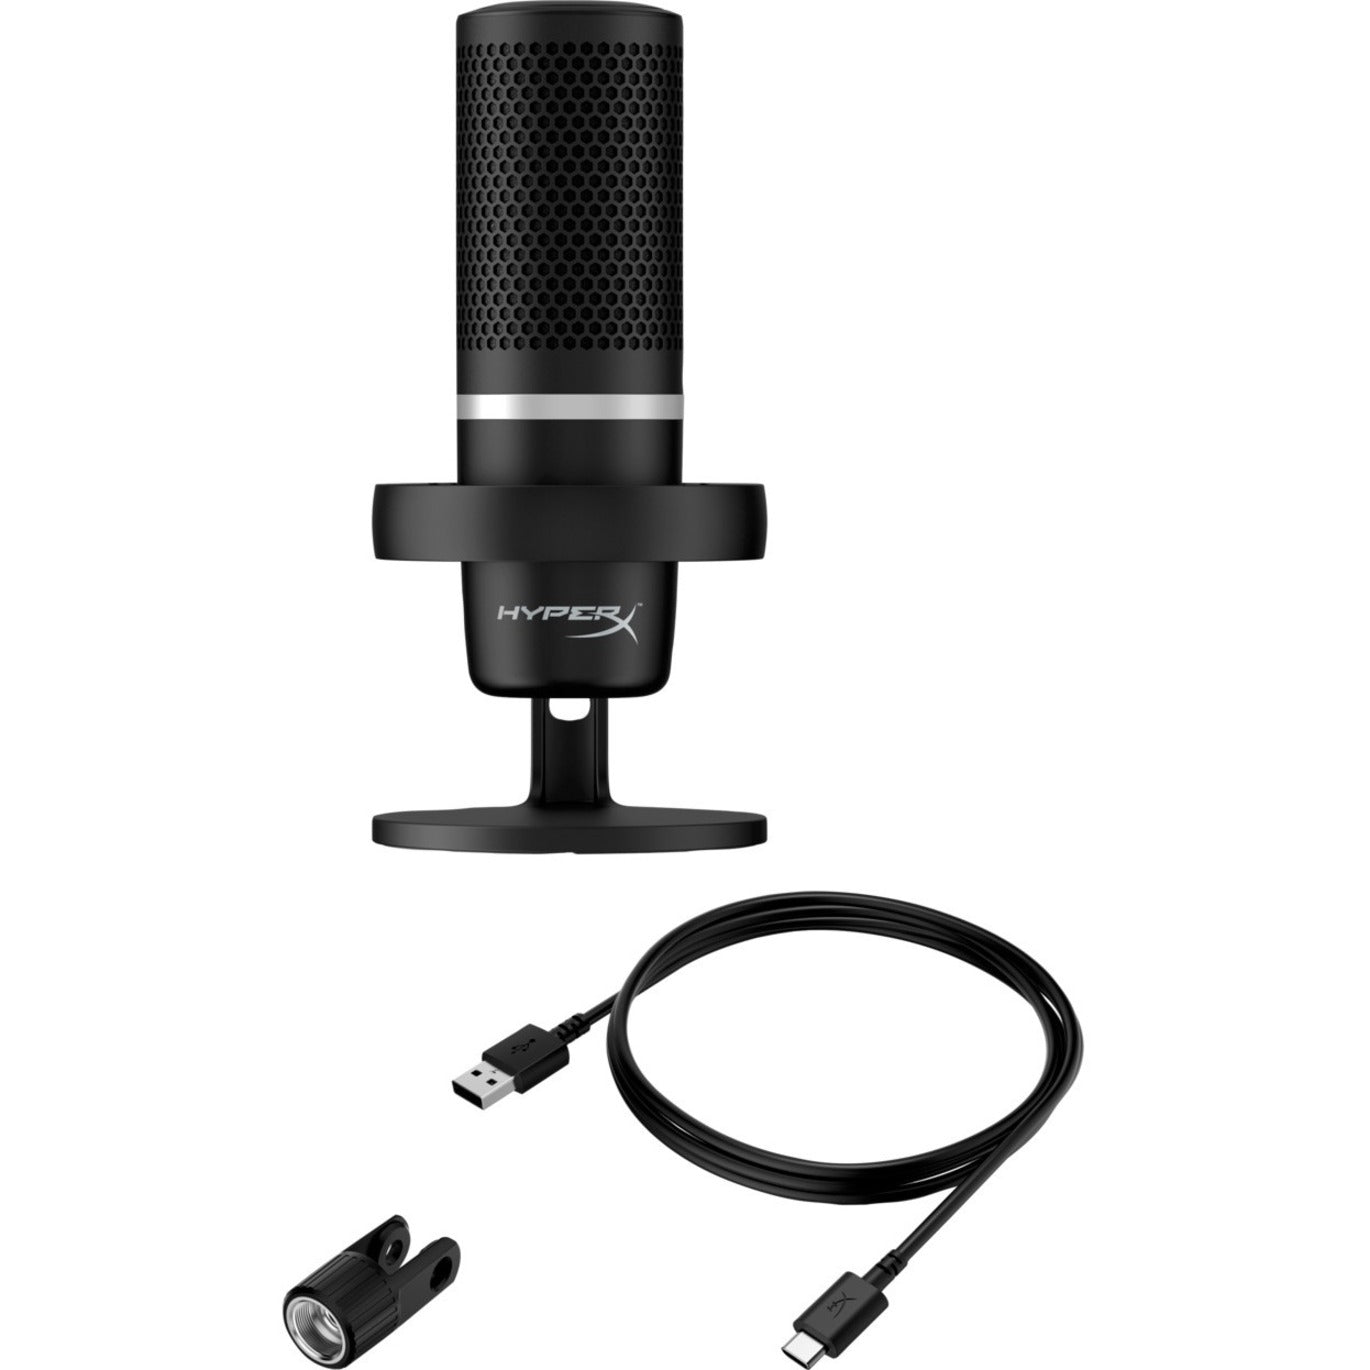 HyperX 4P5E2AA DuoCast Microphone, Black USB Wired Gaming Mic with Shock Mount